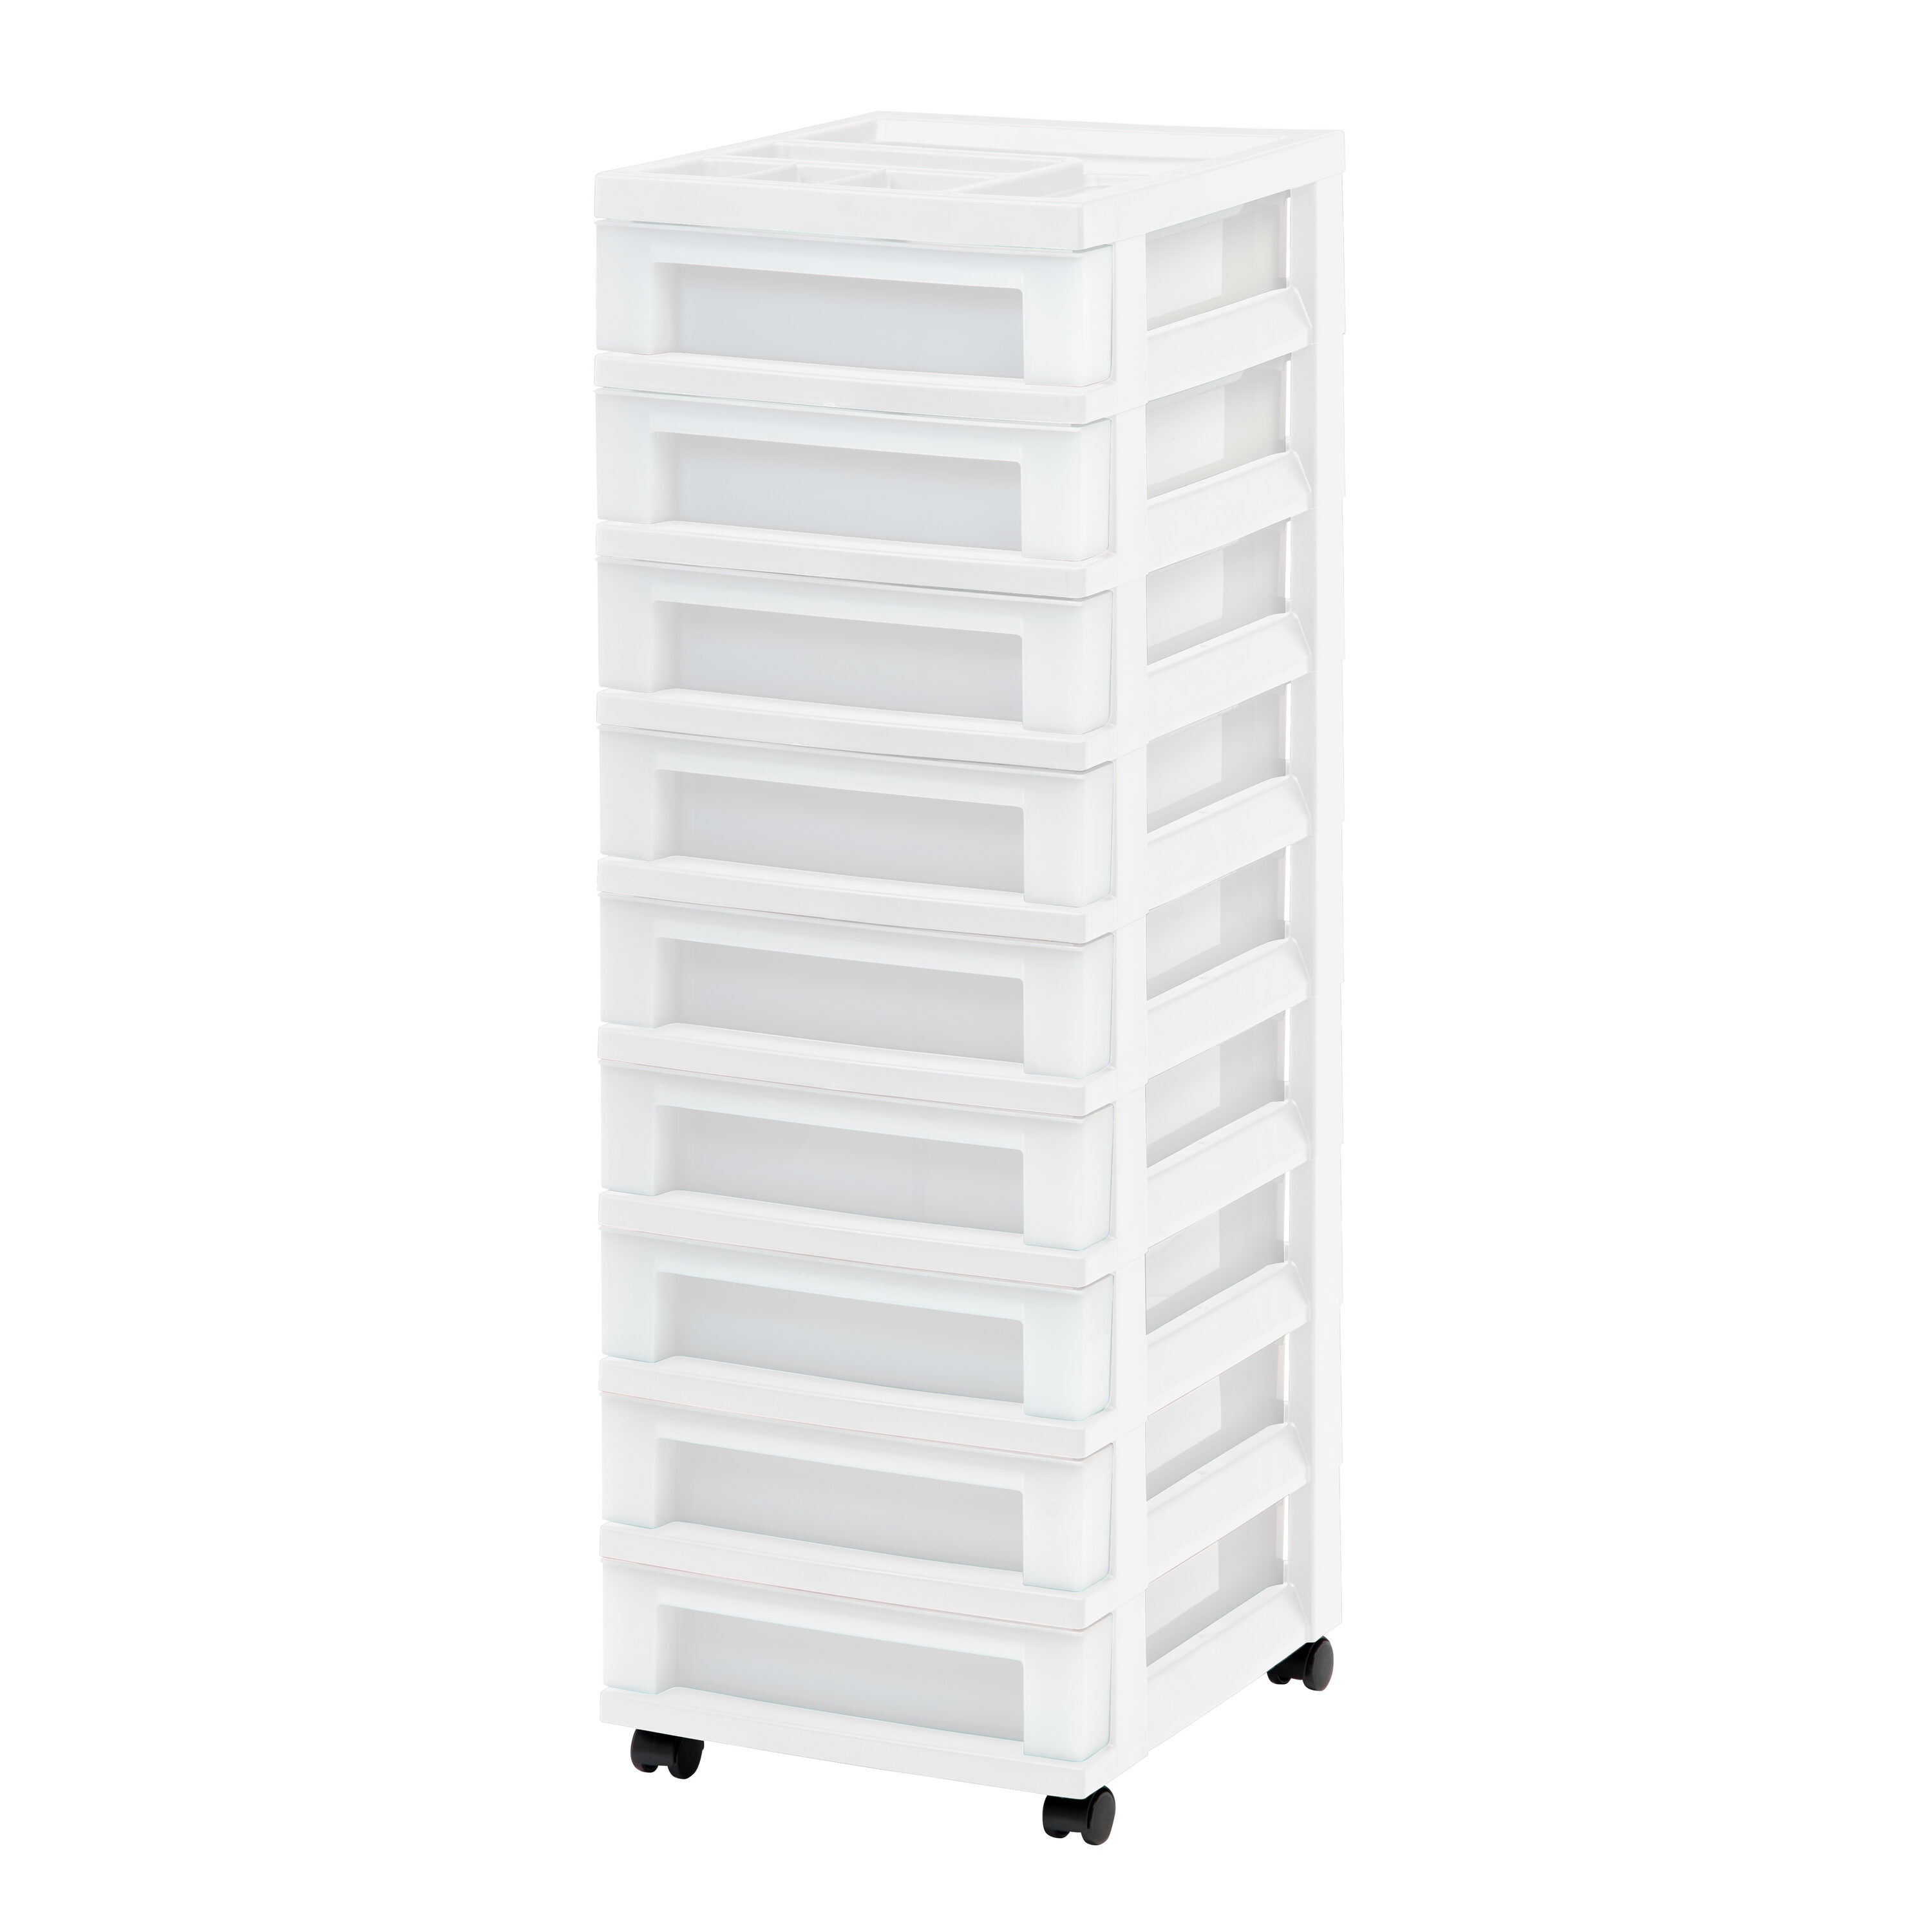 Iris® Clear Small Stacking Drawer, 4ct.